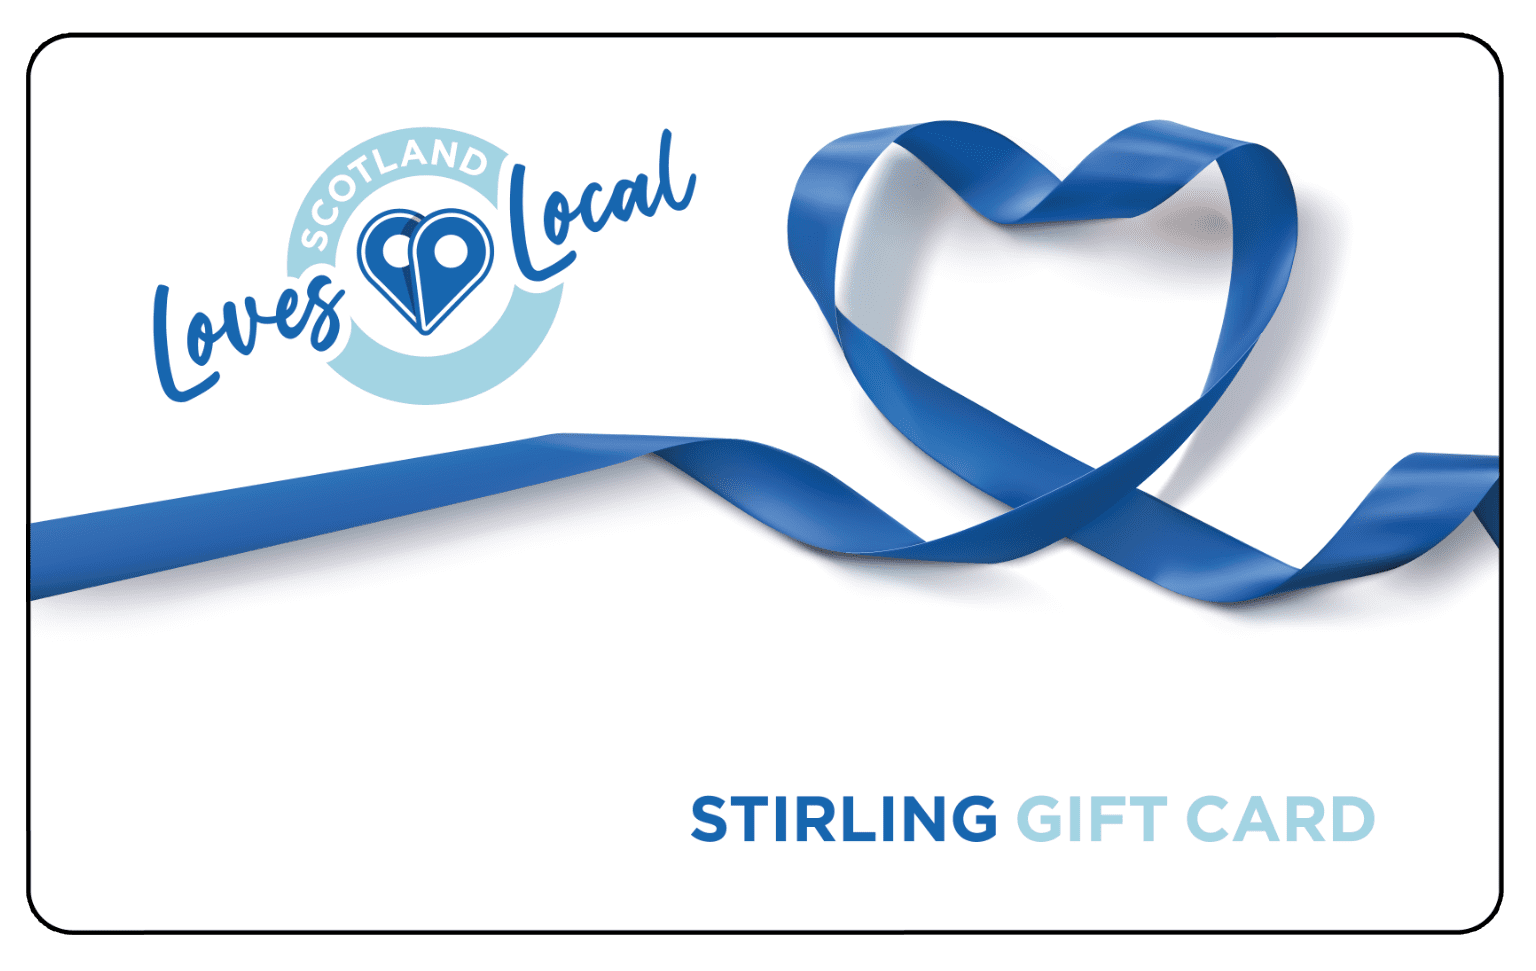 Stirling Gift Card